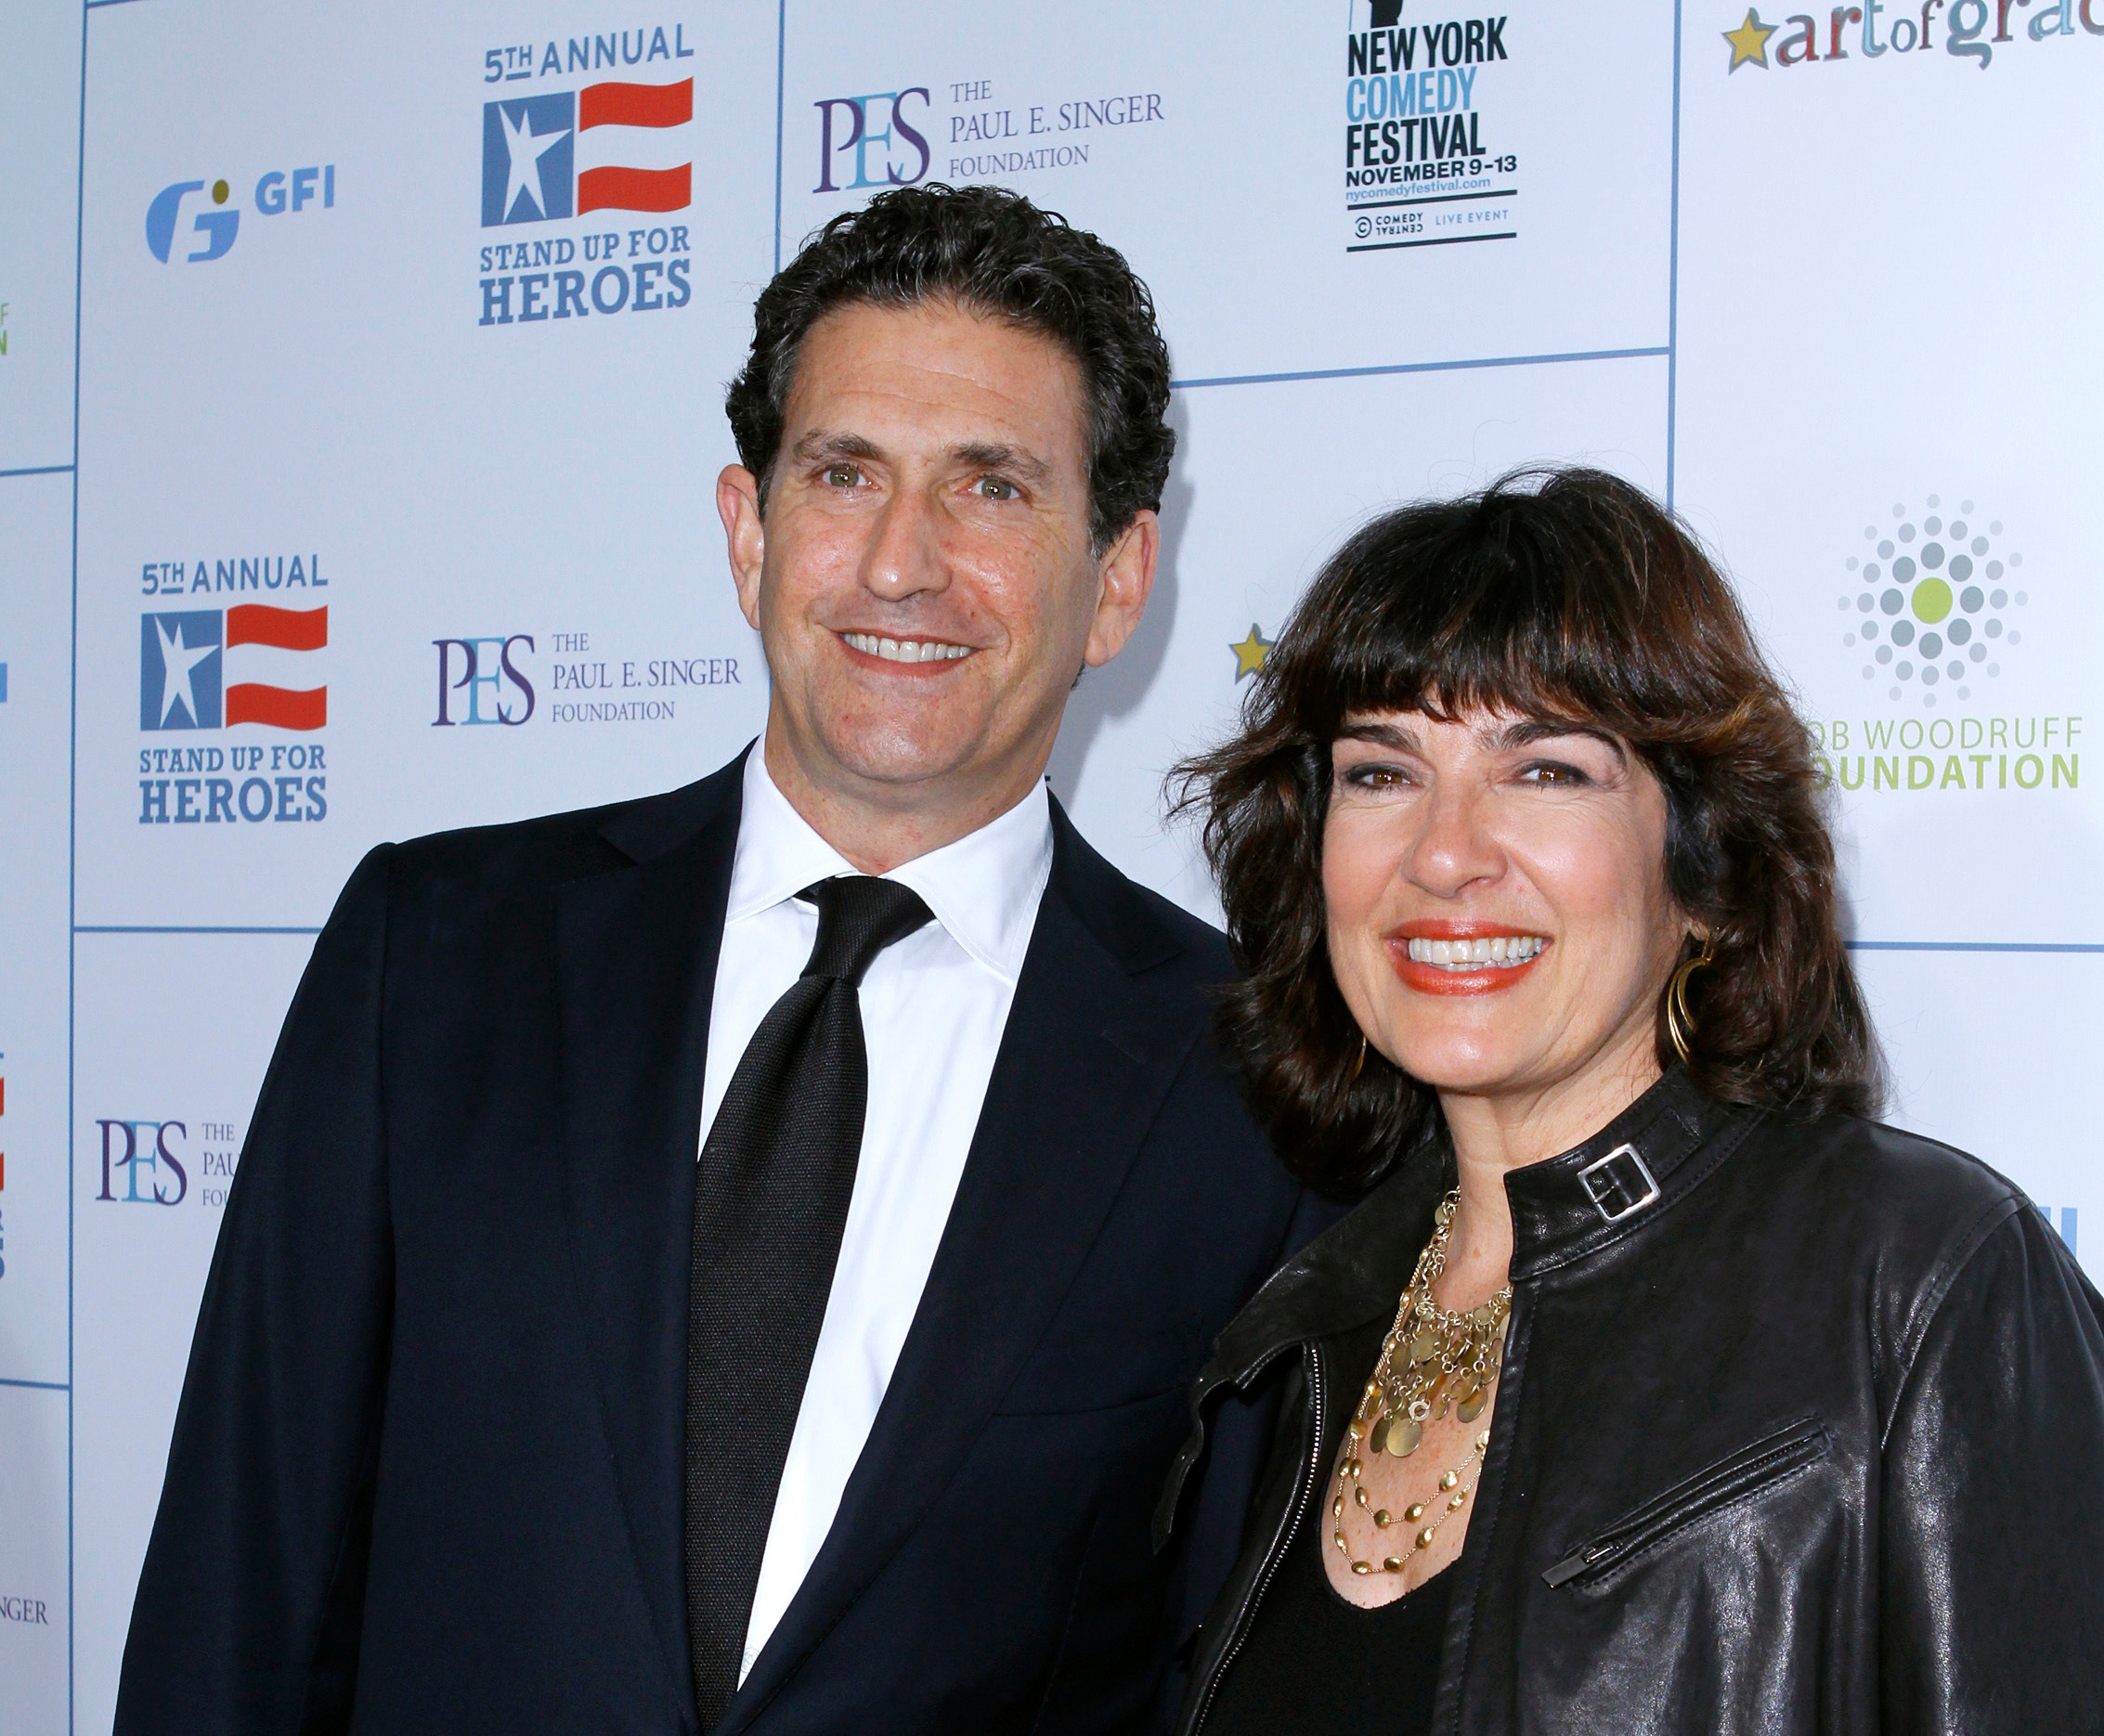 How Old Is Christiane Amanpour Son Christiane amanpour is a